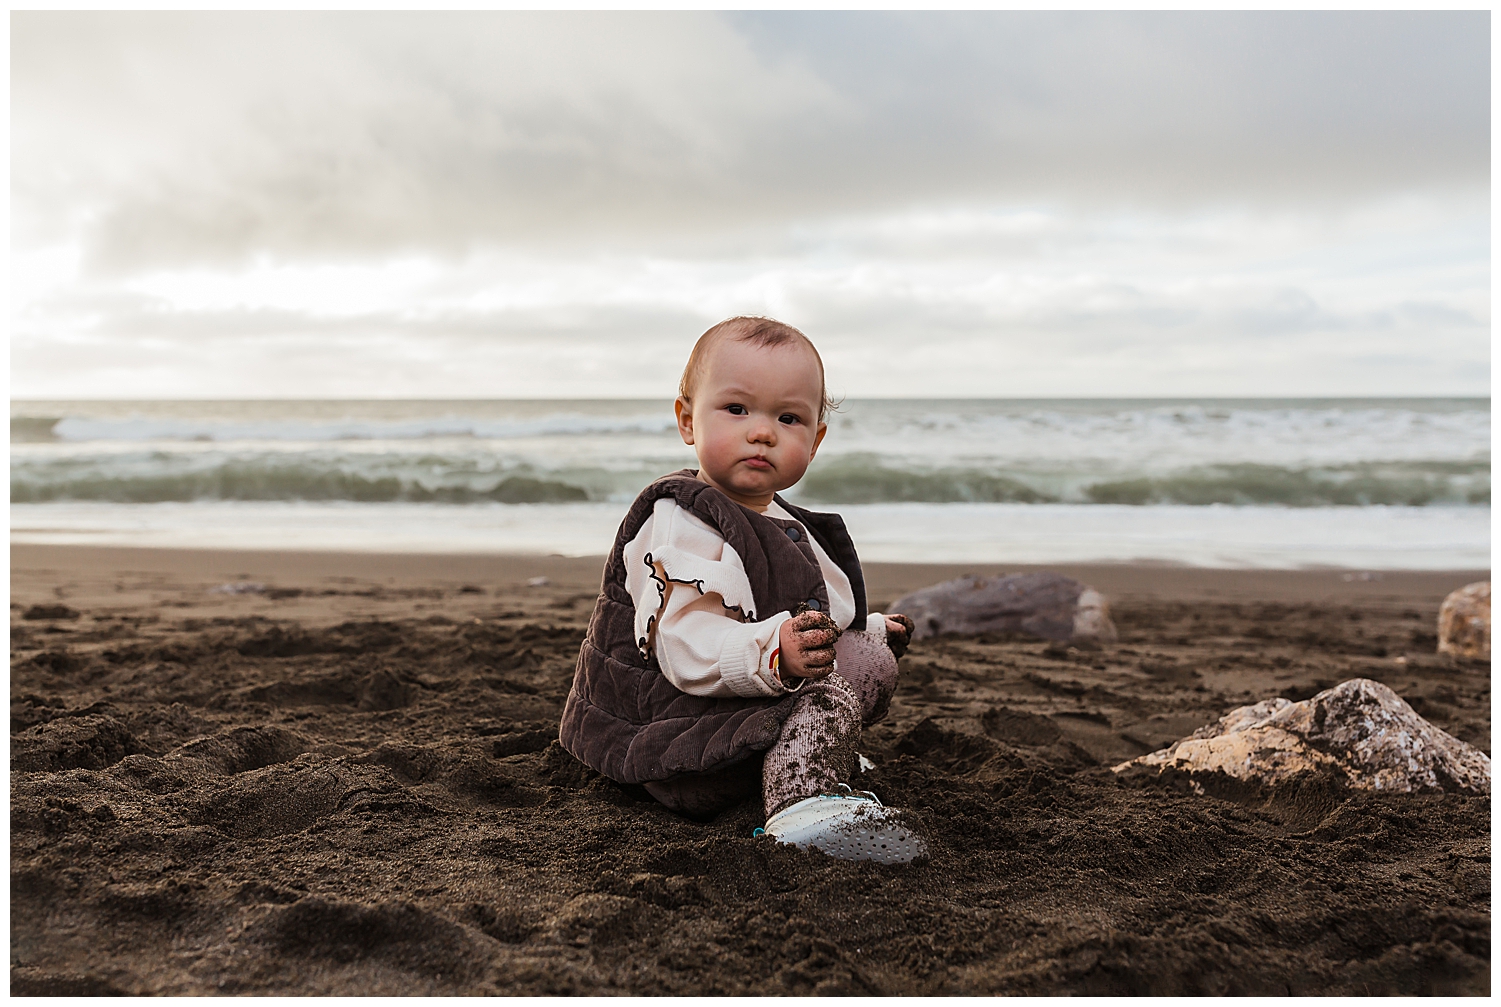 Happy baby covered in sand on the beach during a fun adventure family photo session.